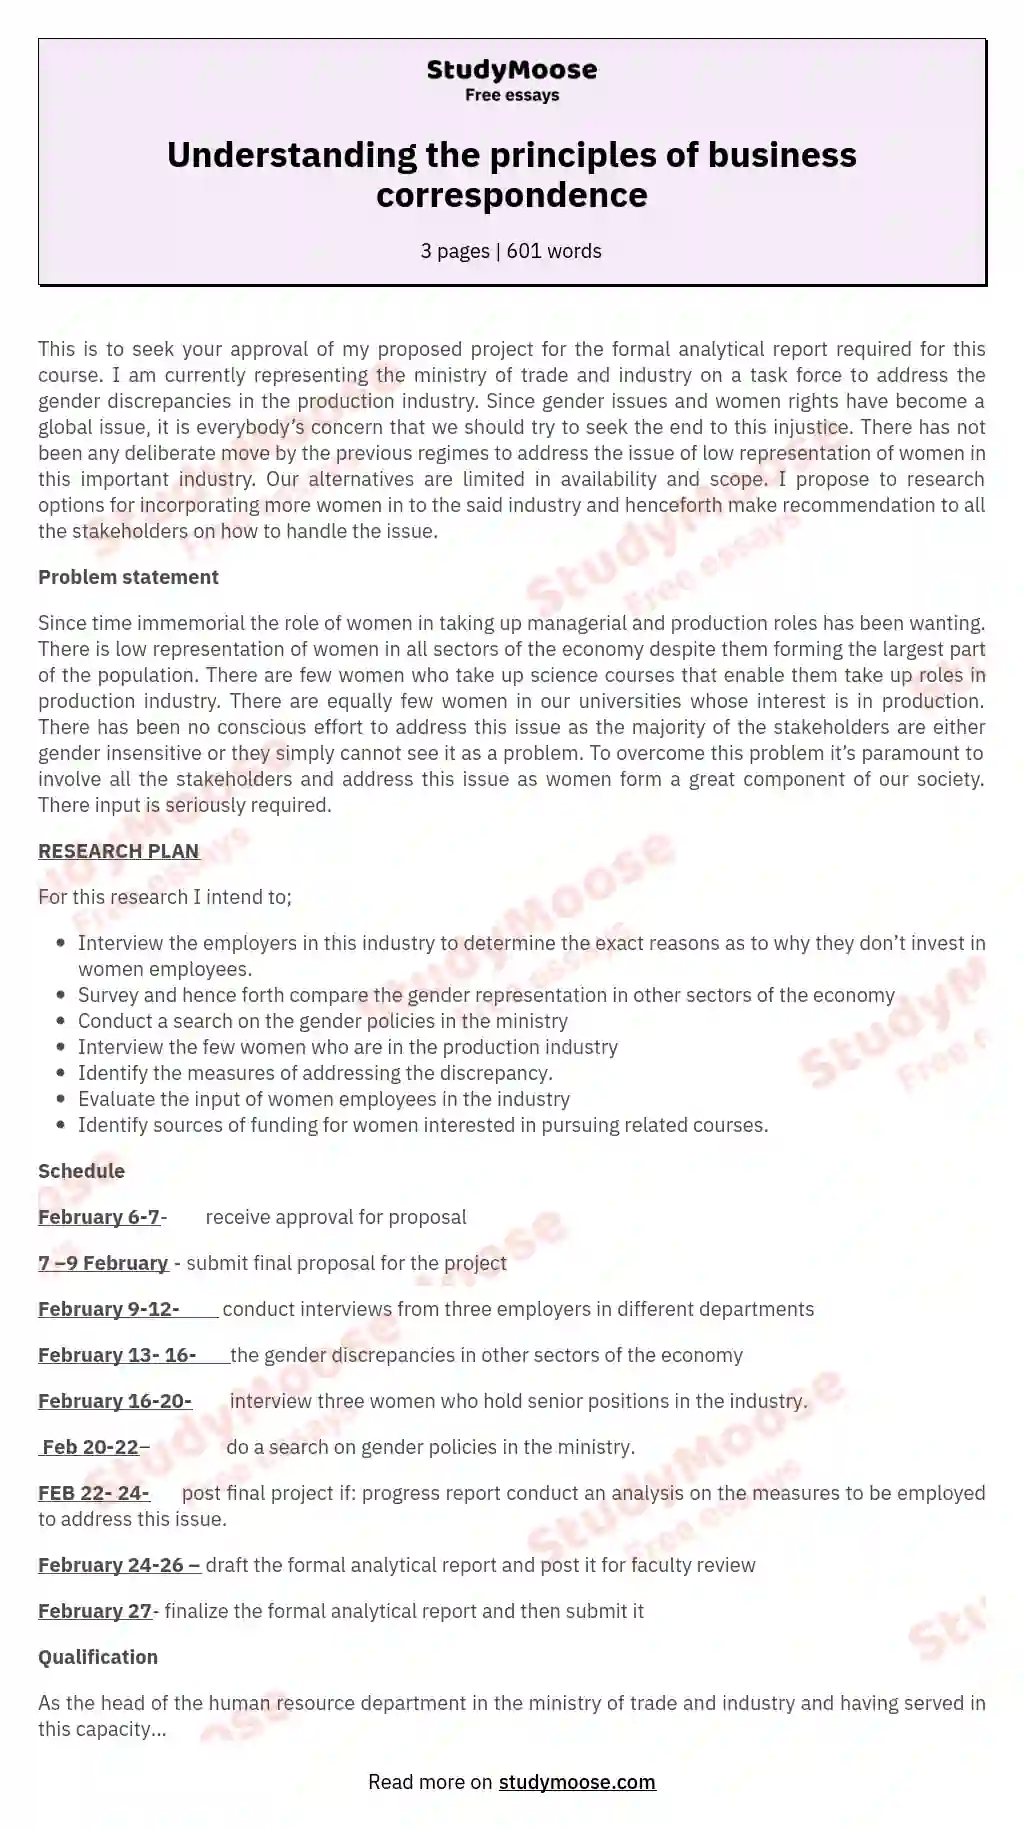 importance of business correspondence essay